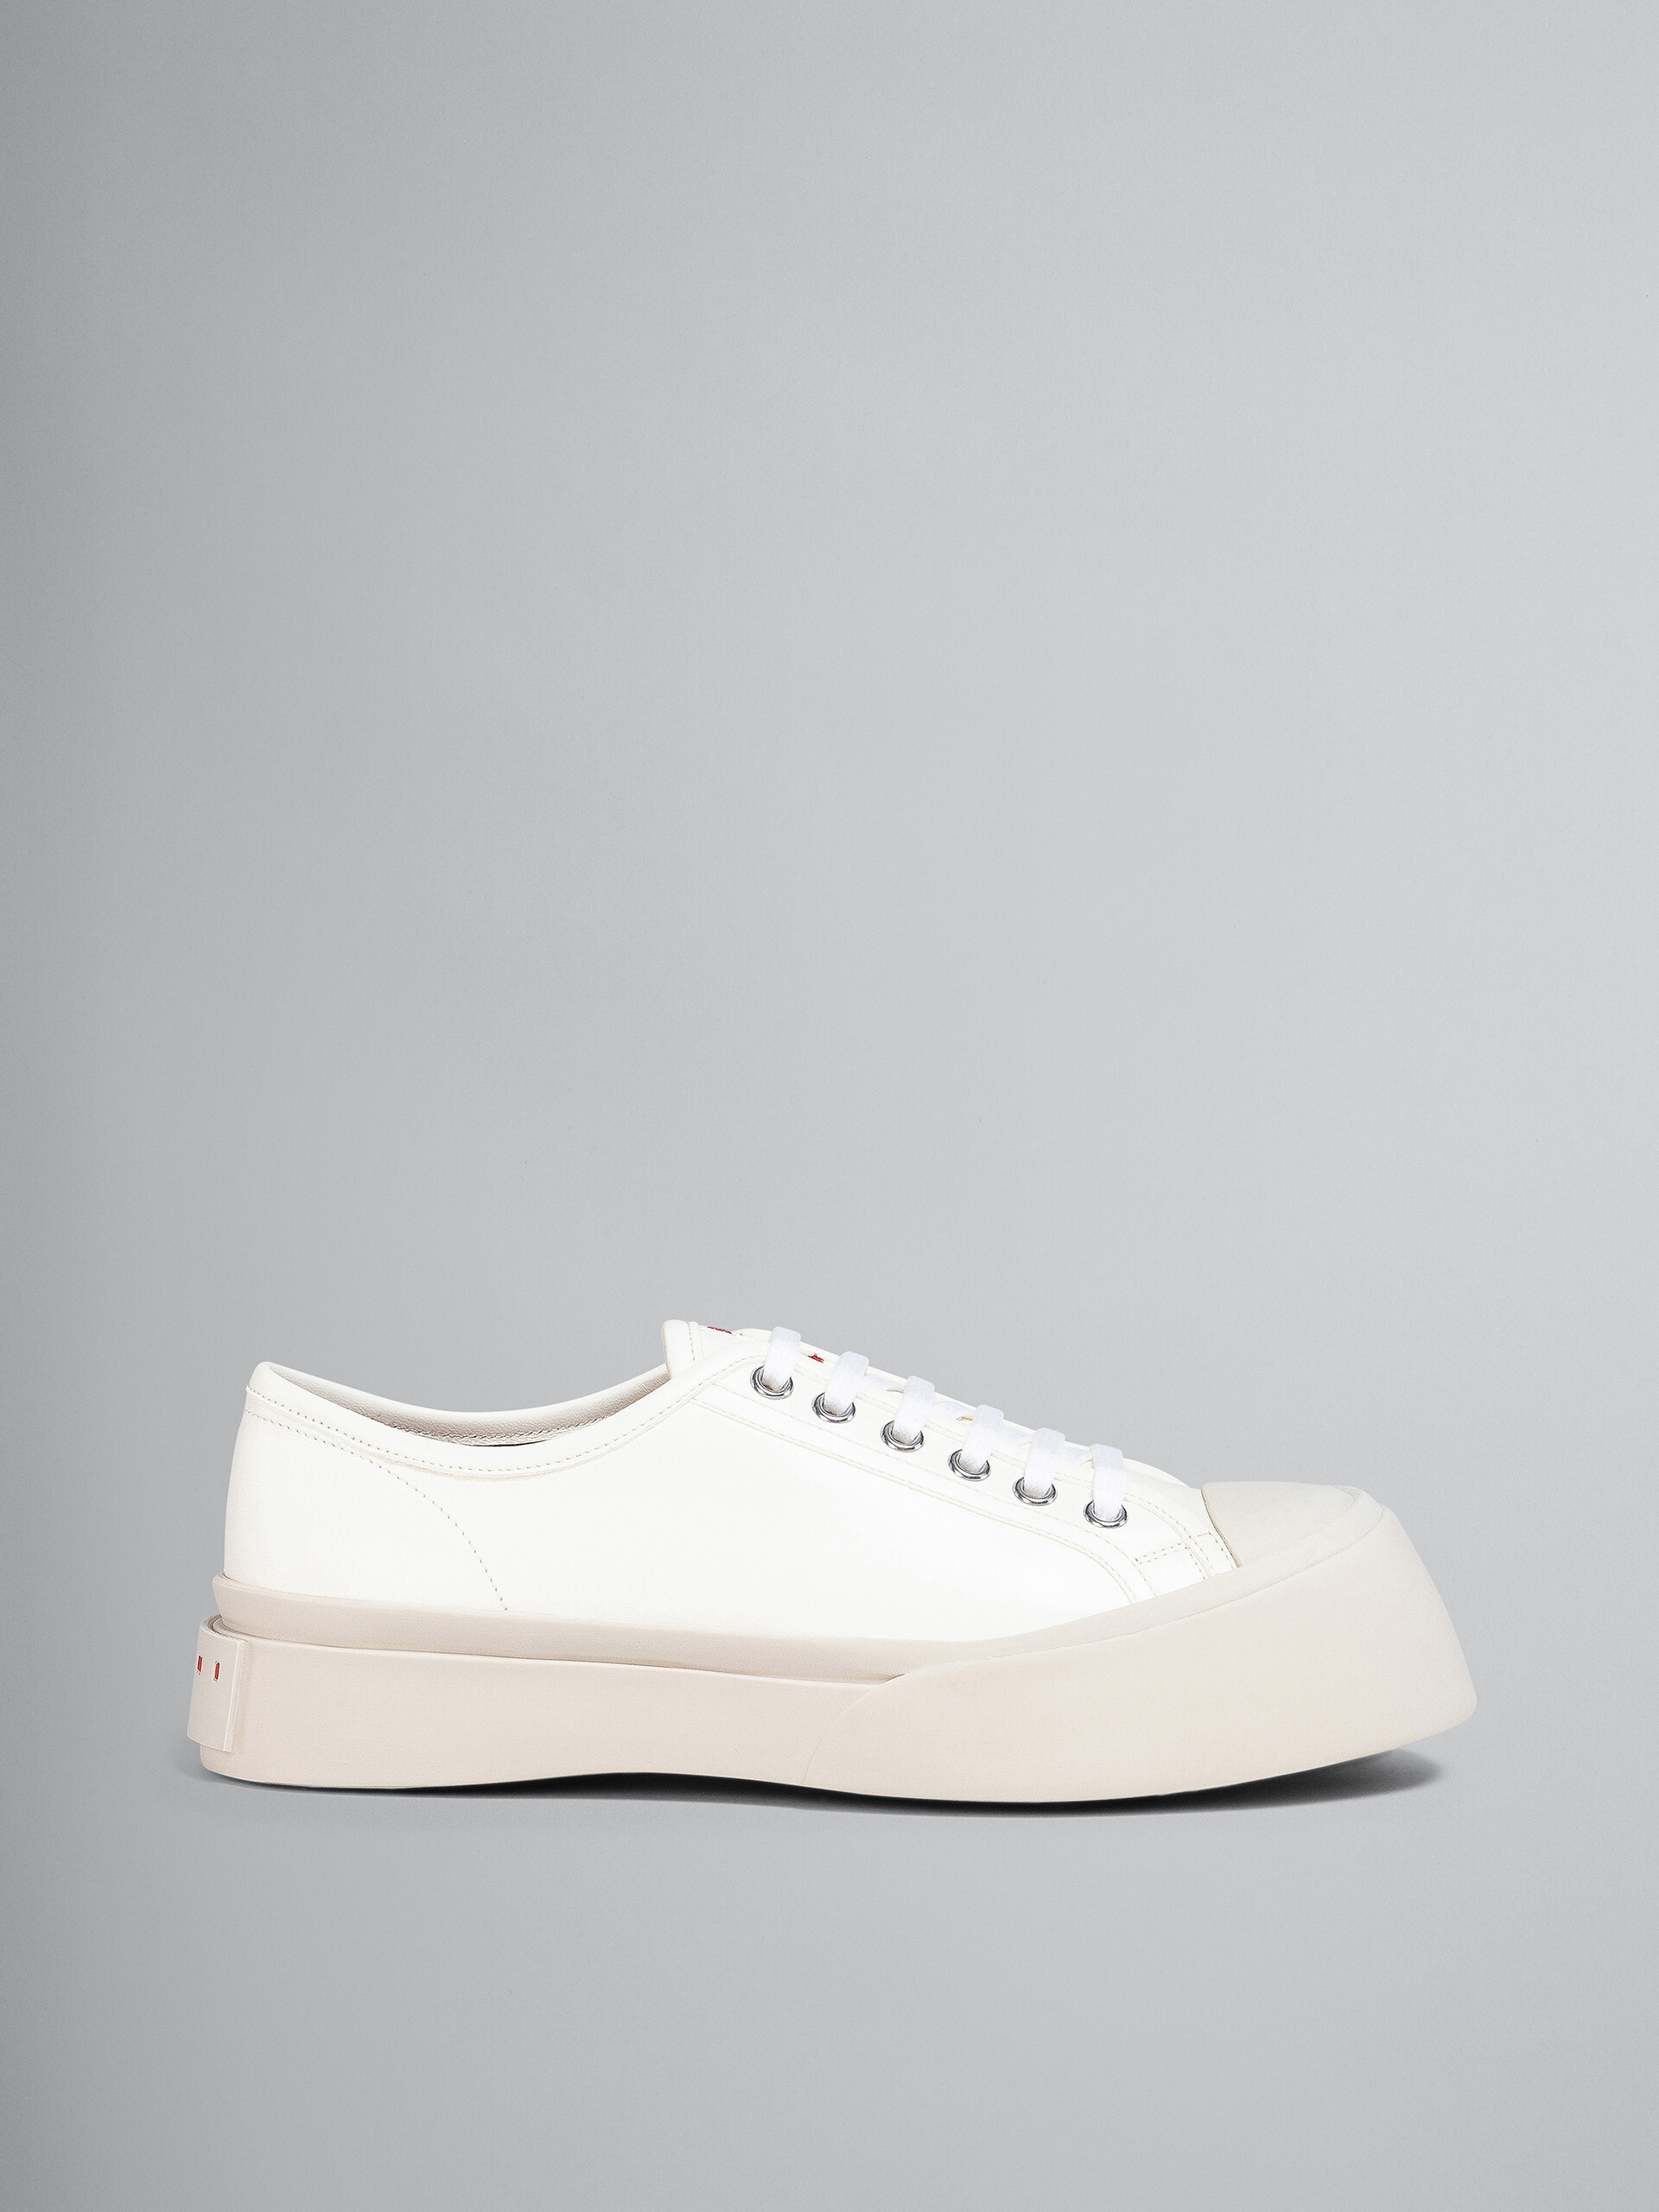 White nappa leather PABLO sneaker - Sneakers - Image 1